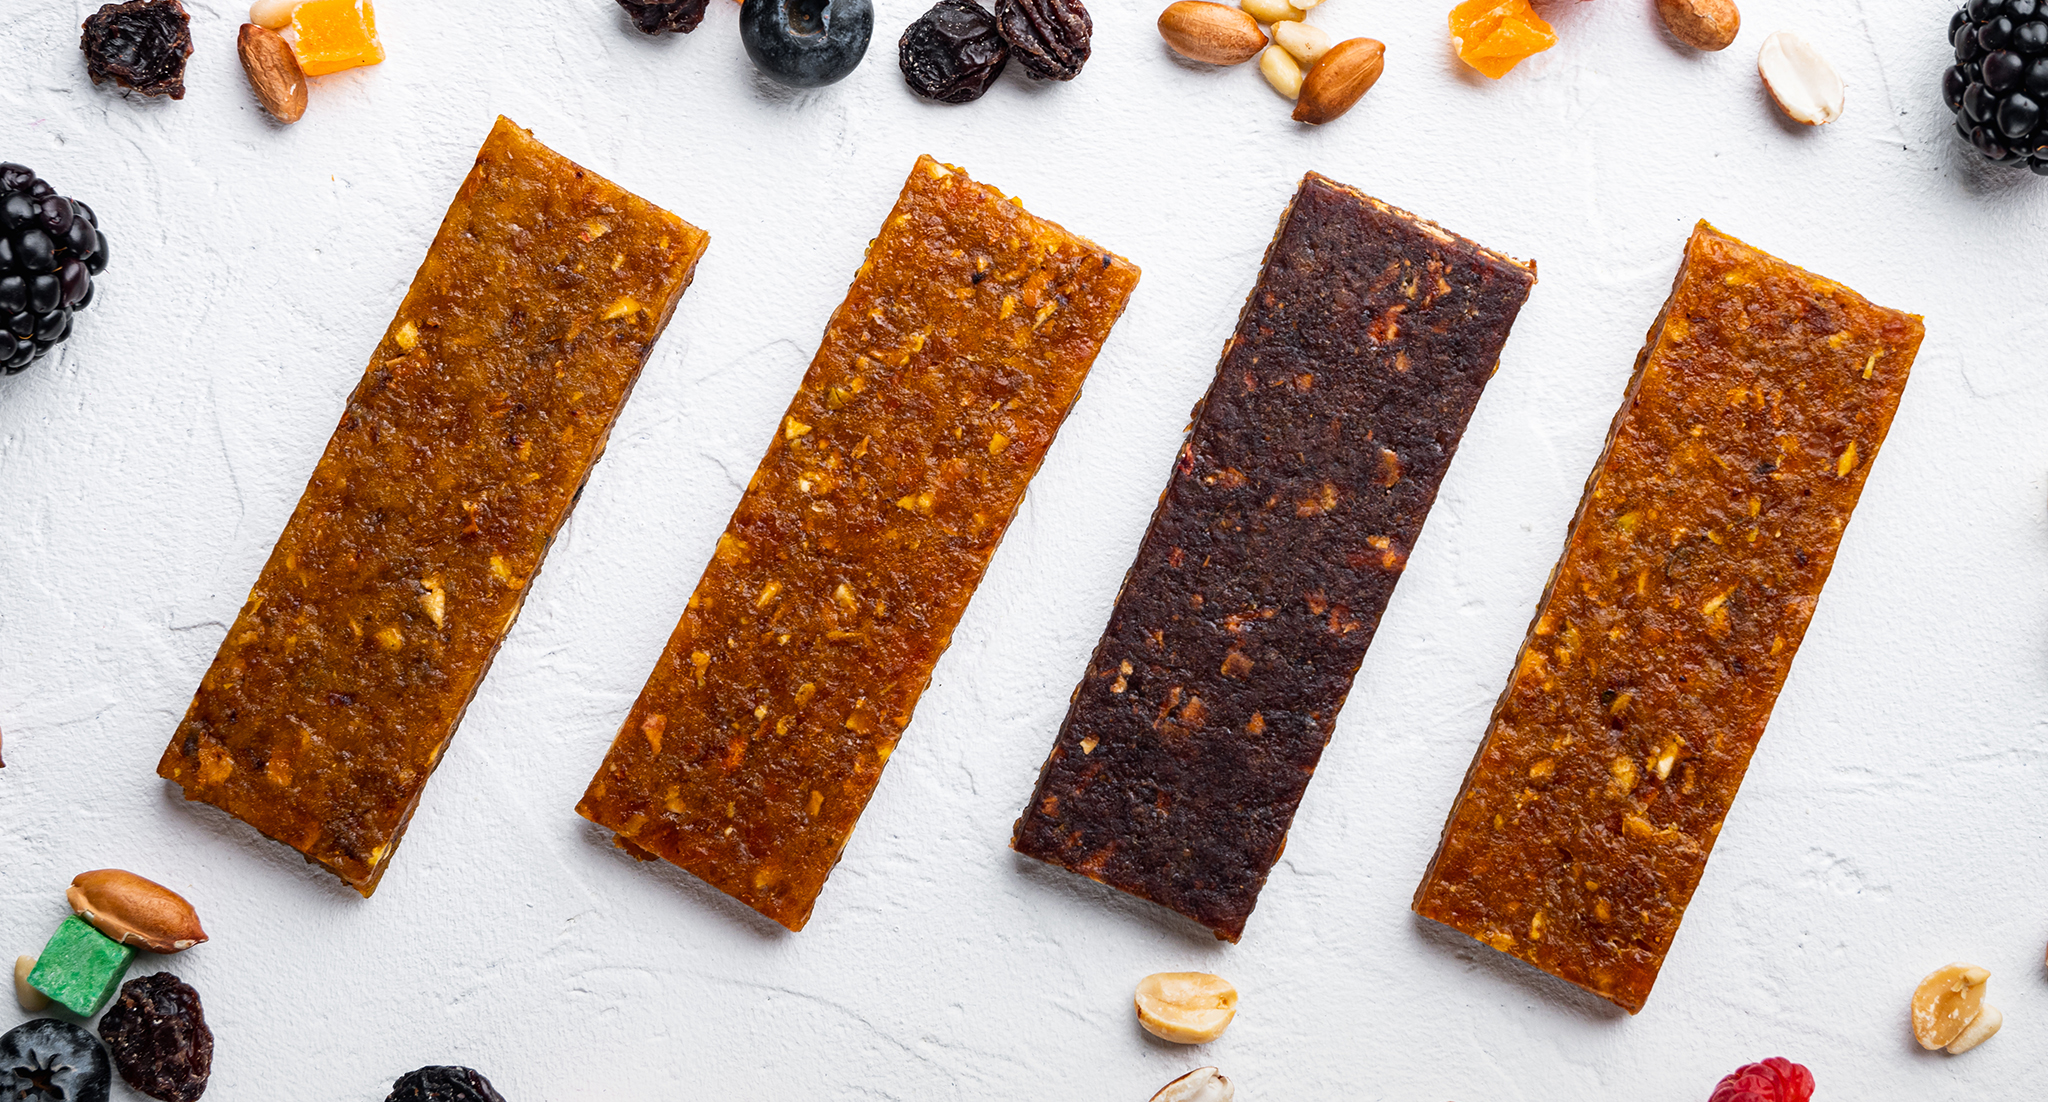 Experience Snack Bar Nirvana with SoftHaven Protein Blends!